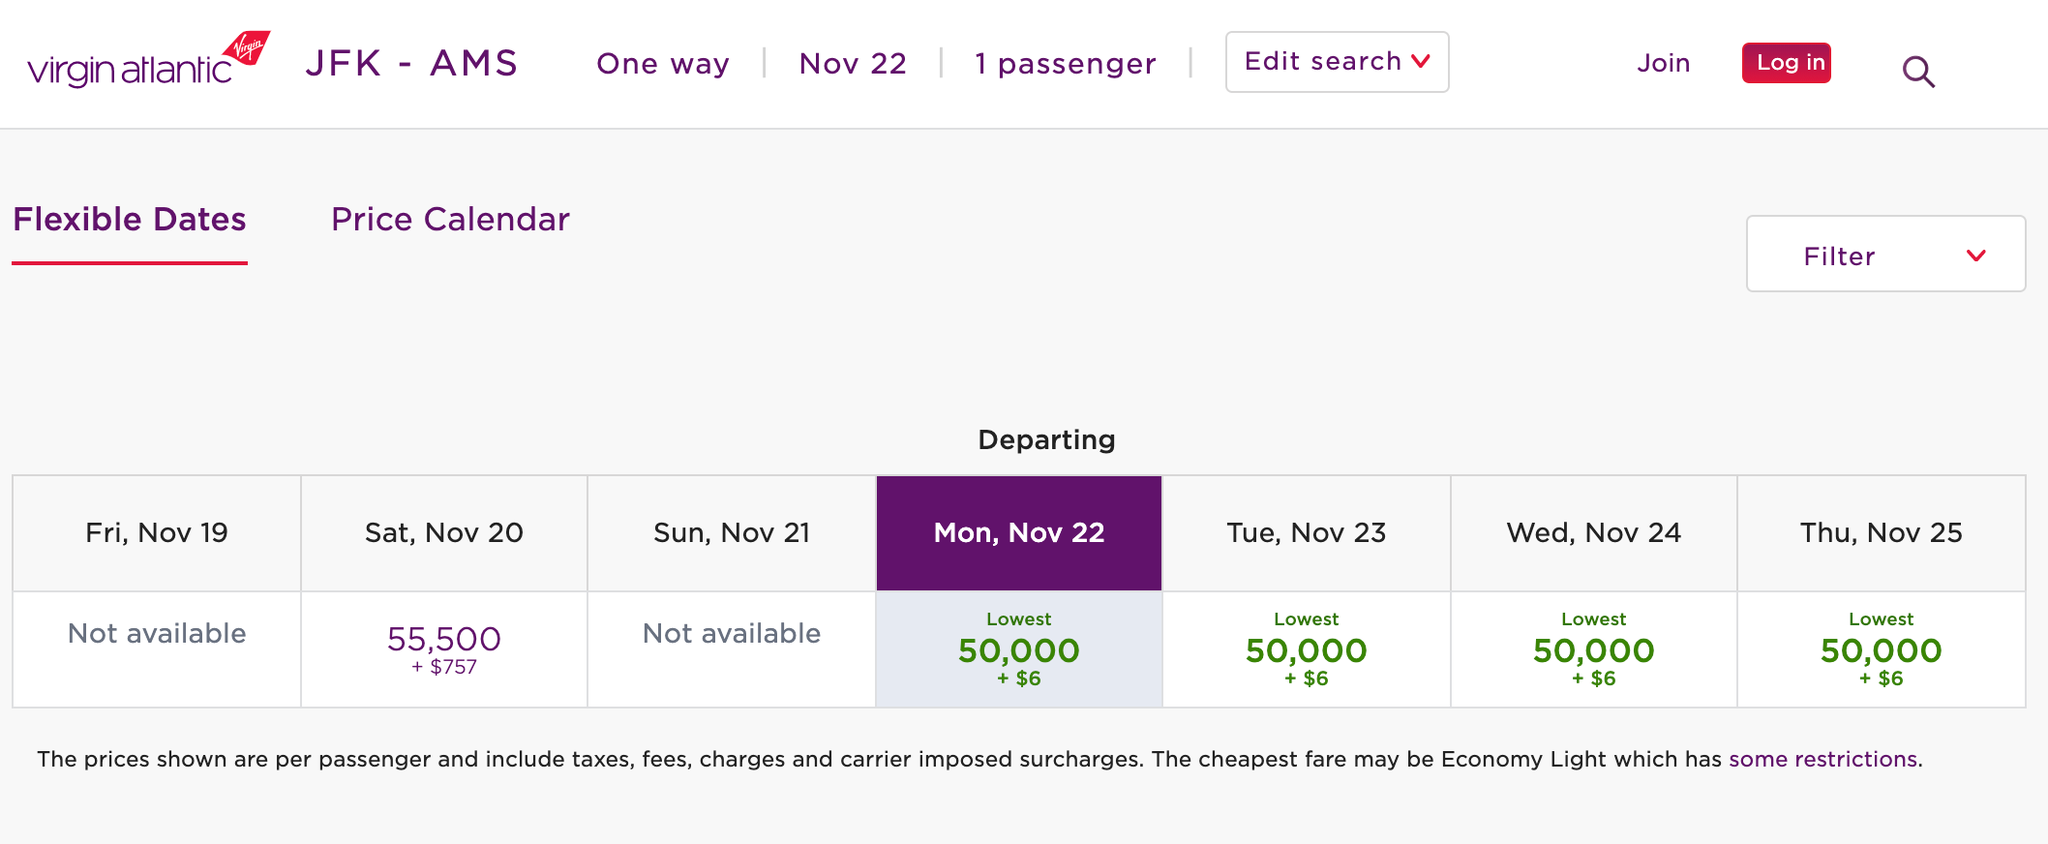 Sweet Spot Sunday: How to save thousands of miles on Delta One awards